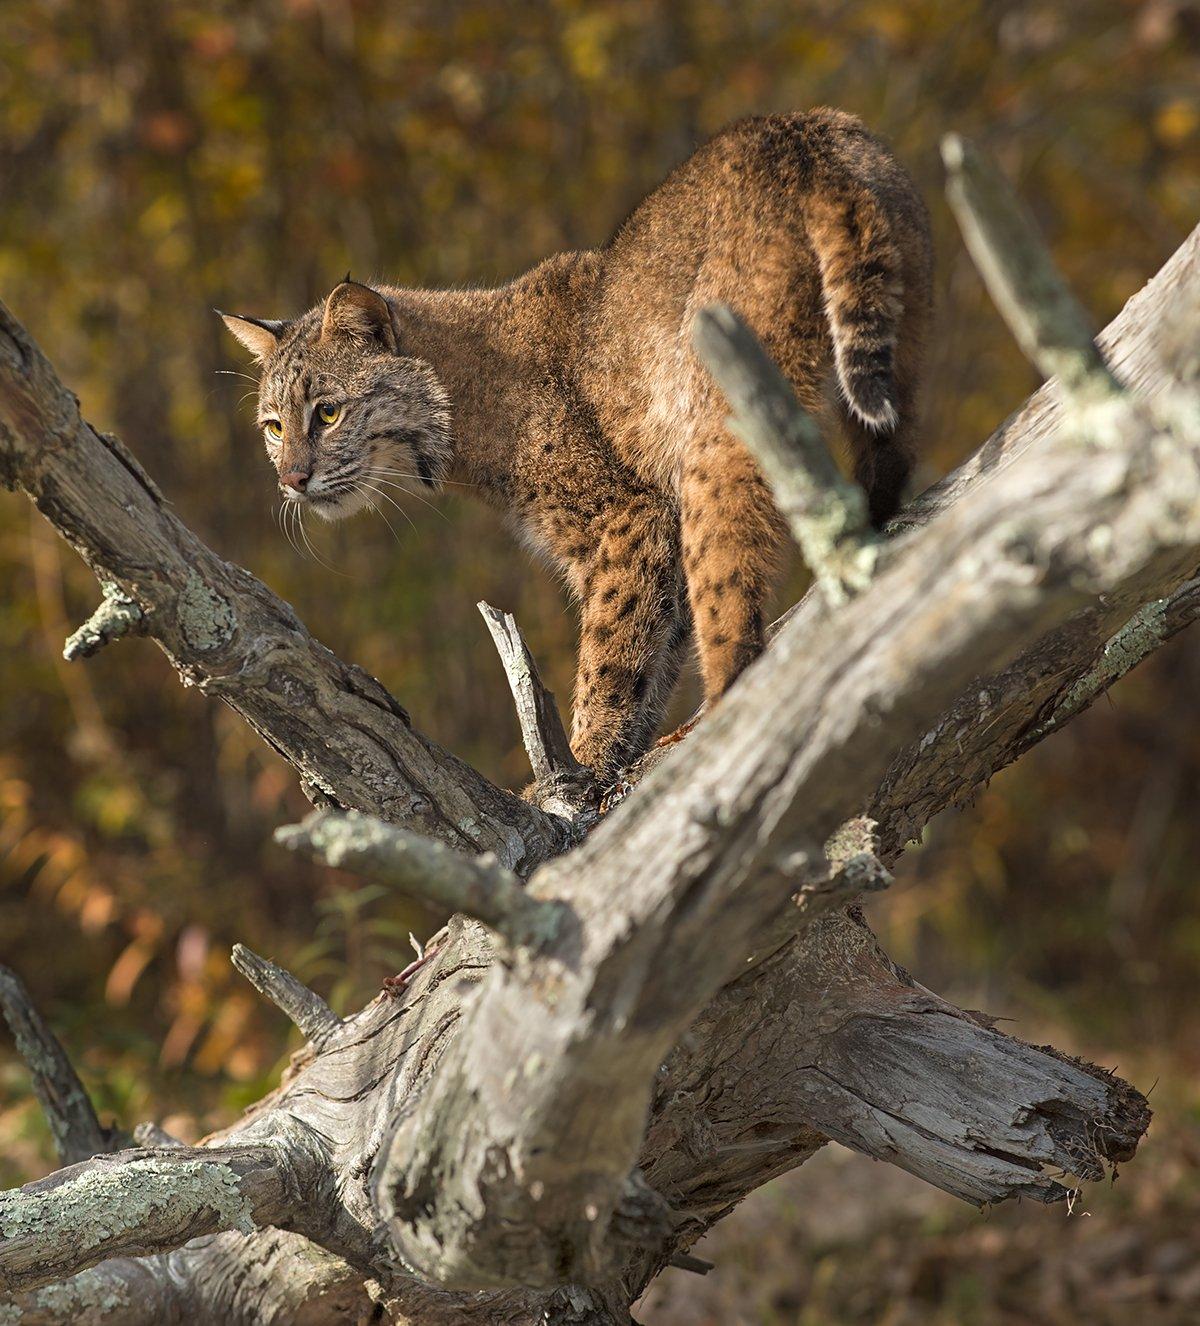 The New Hampshire Fish and Game Commission has approved a bobcat season for 2016-'17. Photo © Geoffrey Kuchera/Shutterstock.com